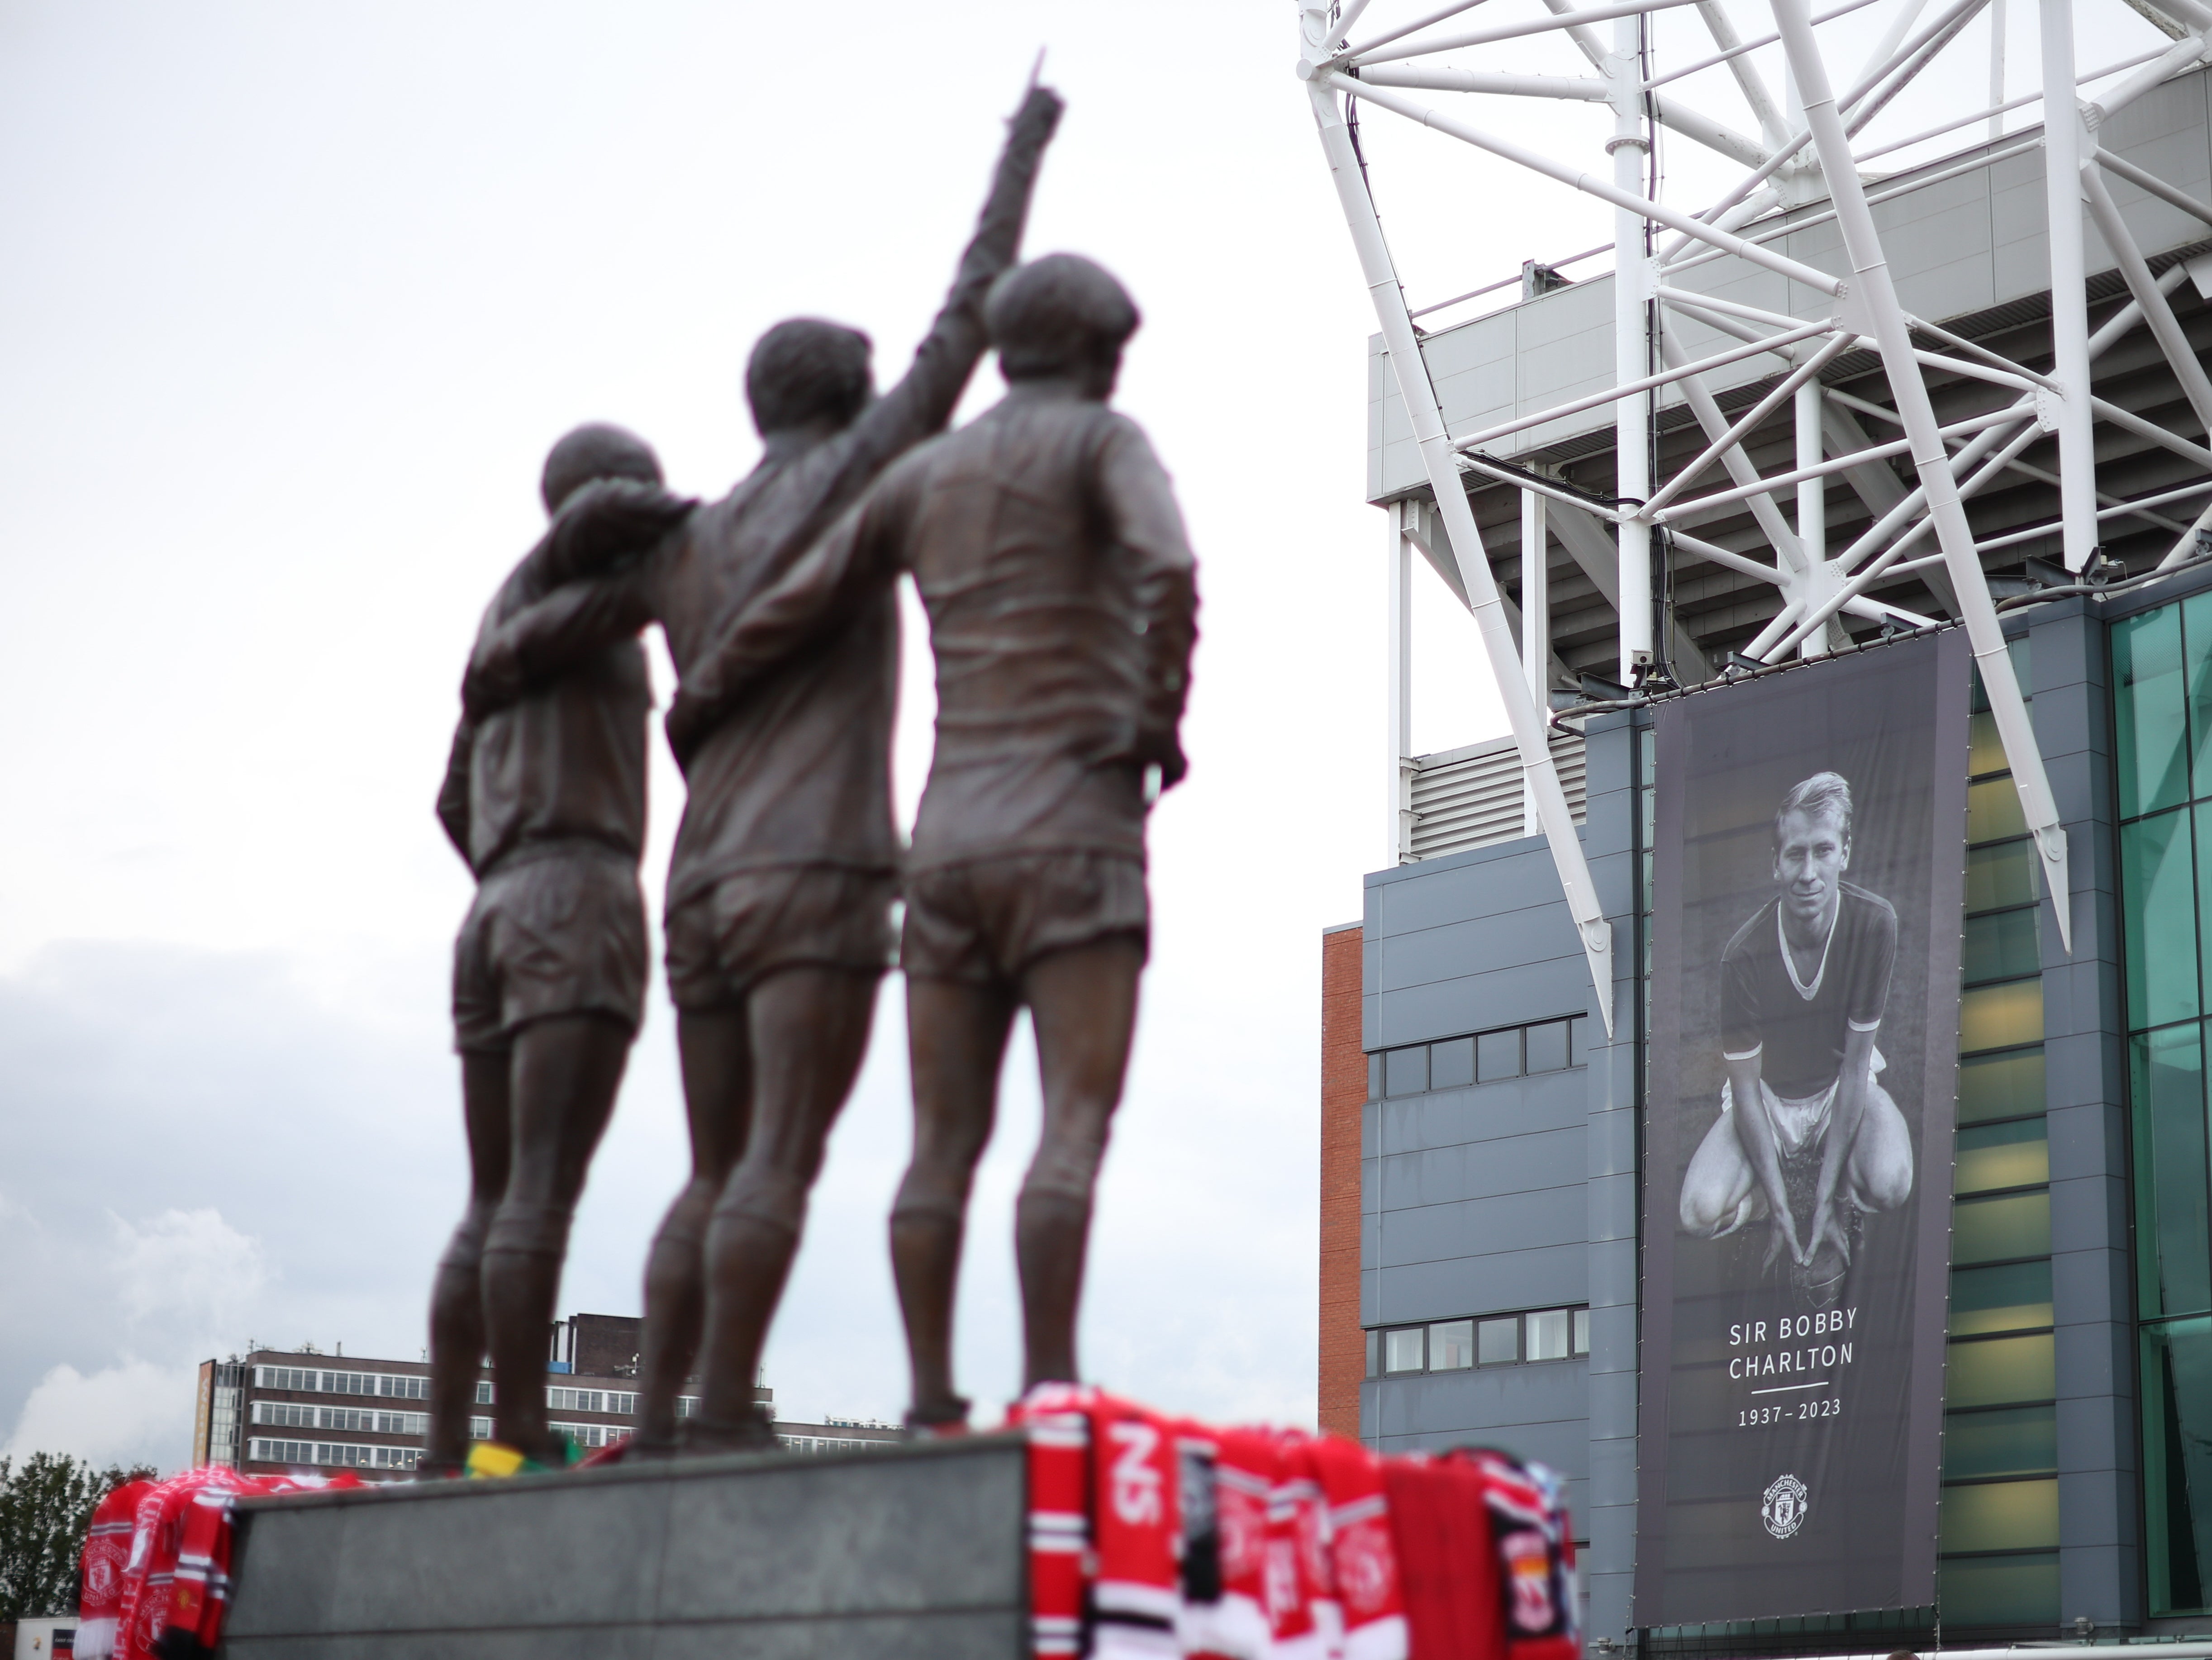 Manchester United will deliver fitting derby celebration in house that Sir  Bobby Charlton built | The Independent